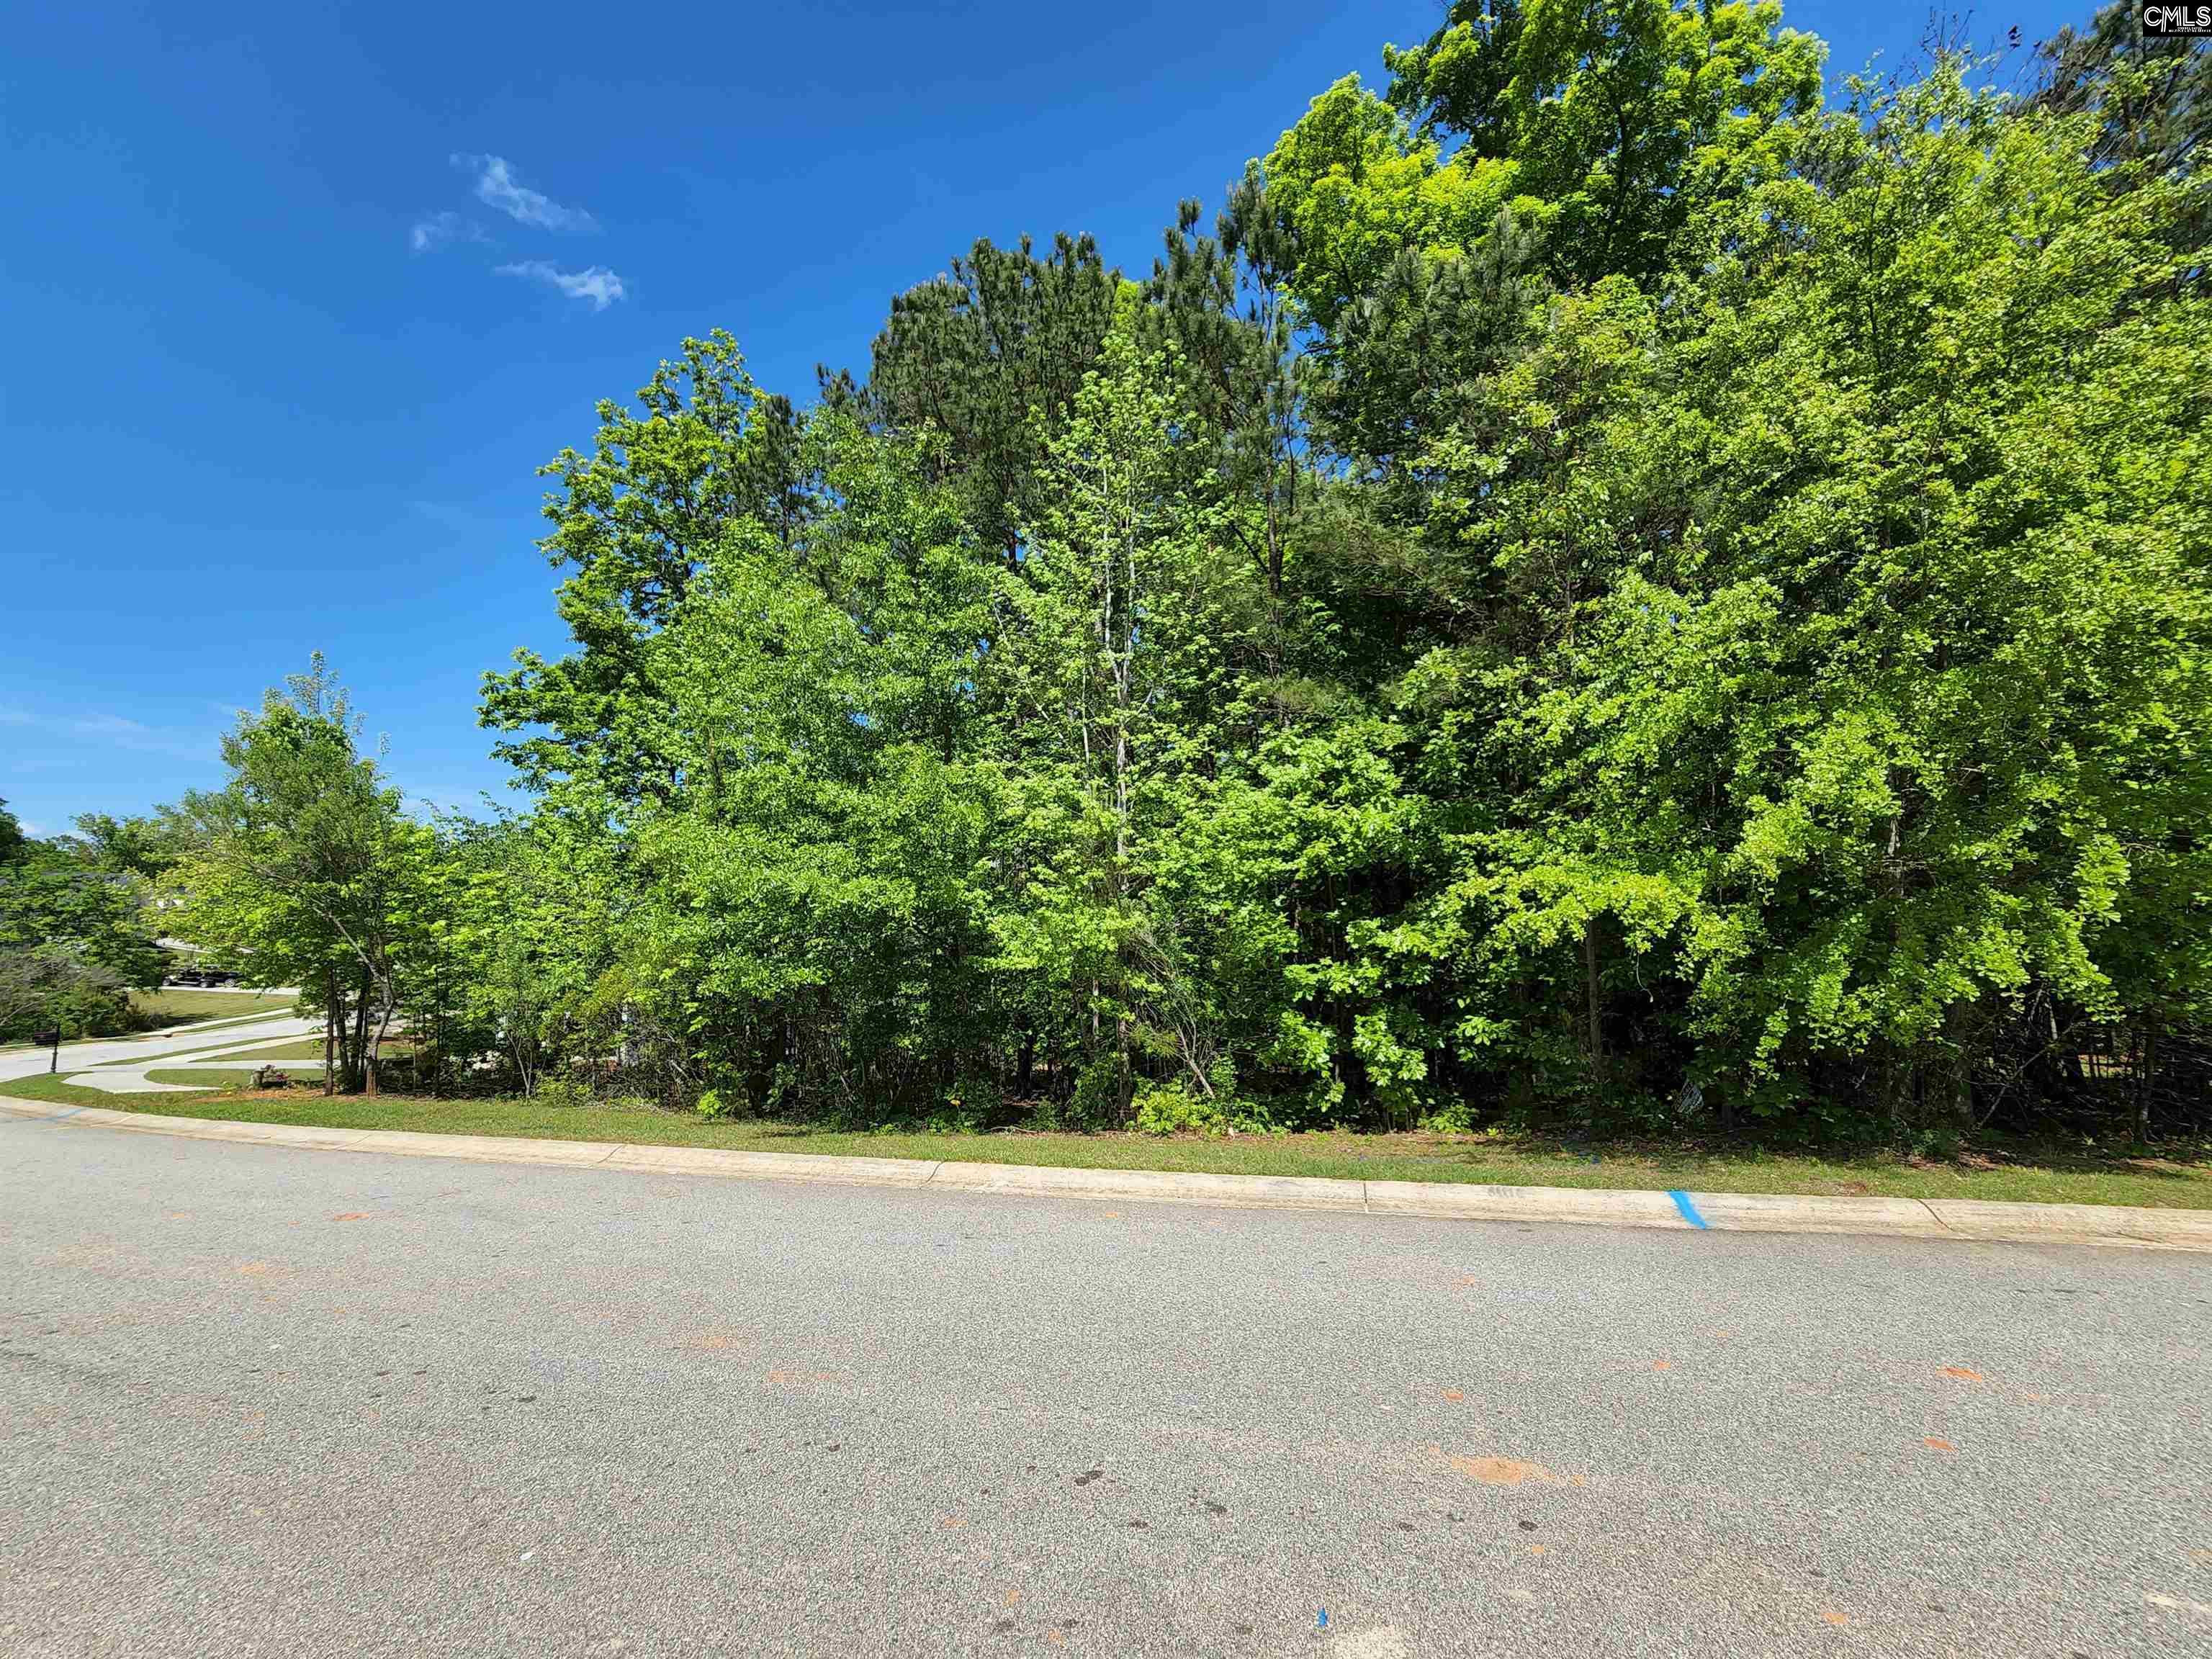 Excellent building lot in desirable Pintail Point; an amenity-rich and architecturally-pleasing neighborhood on the south side of Lake Murray. Topping the list of neighborhood amenities is access to Lake Murray! When you're not out on your boat, enjoy the community clubhouse, pool, walking trails, and tennis courts. Min sf for your new build is 2,200 sf.